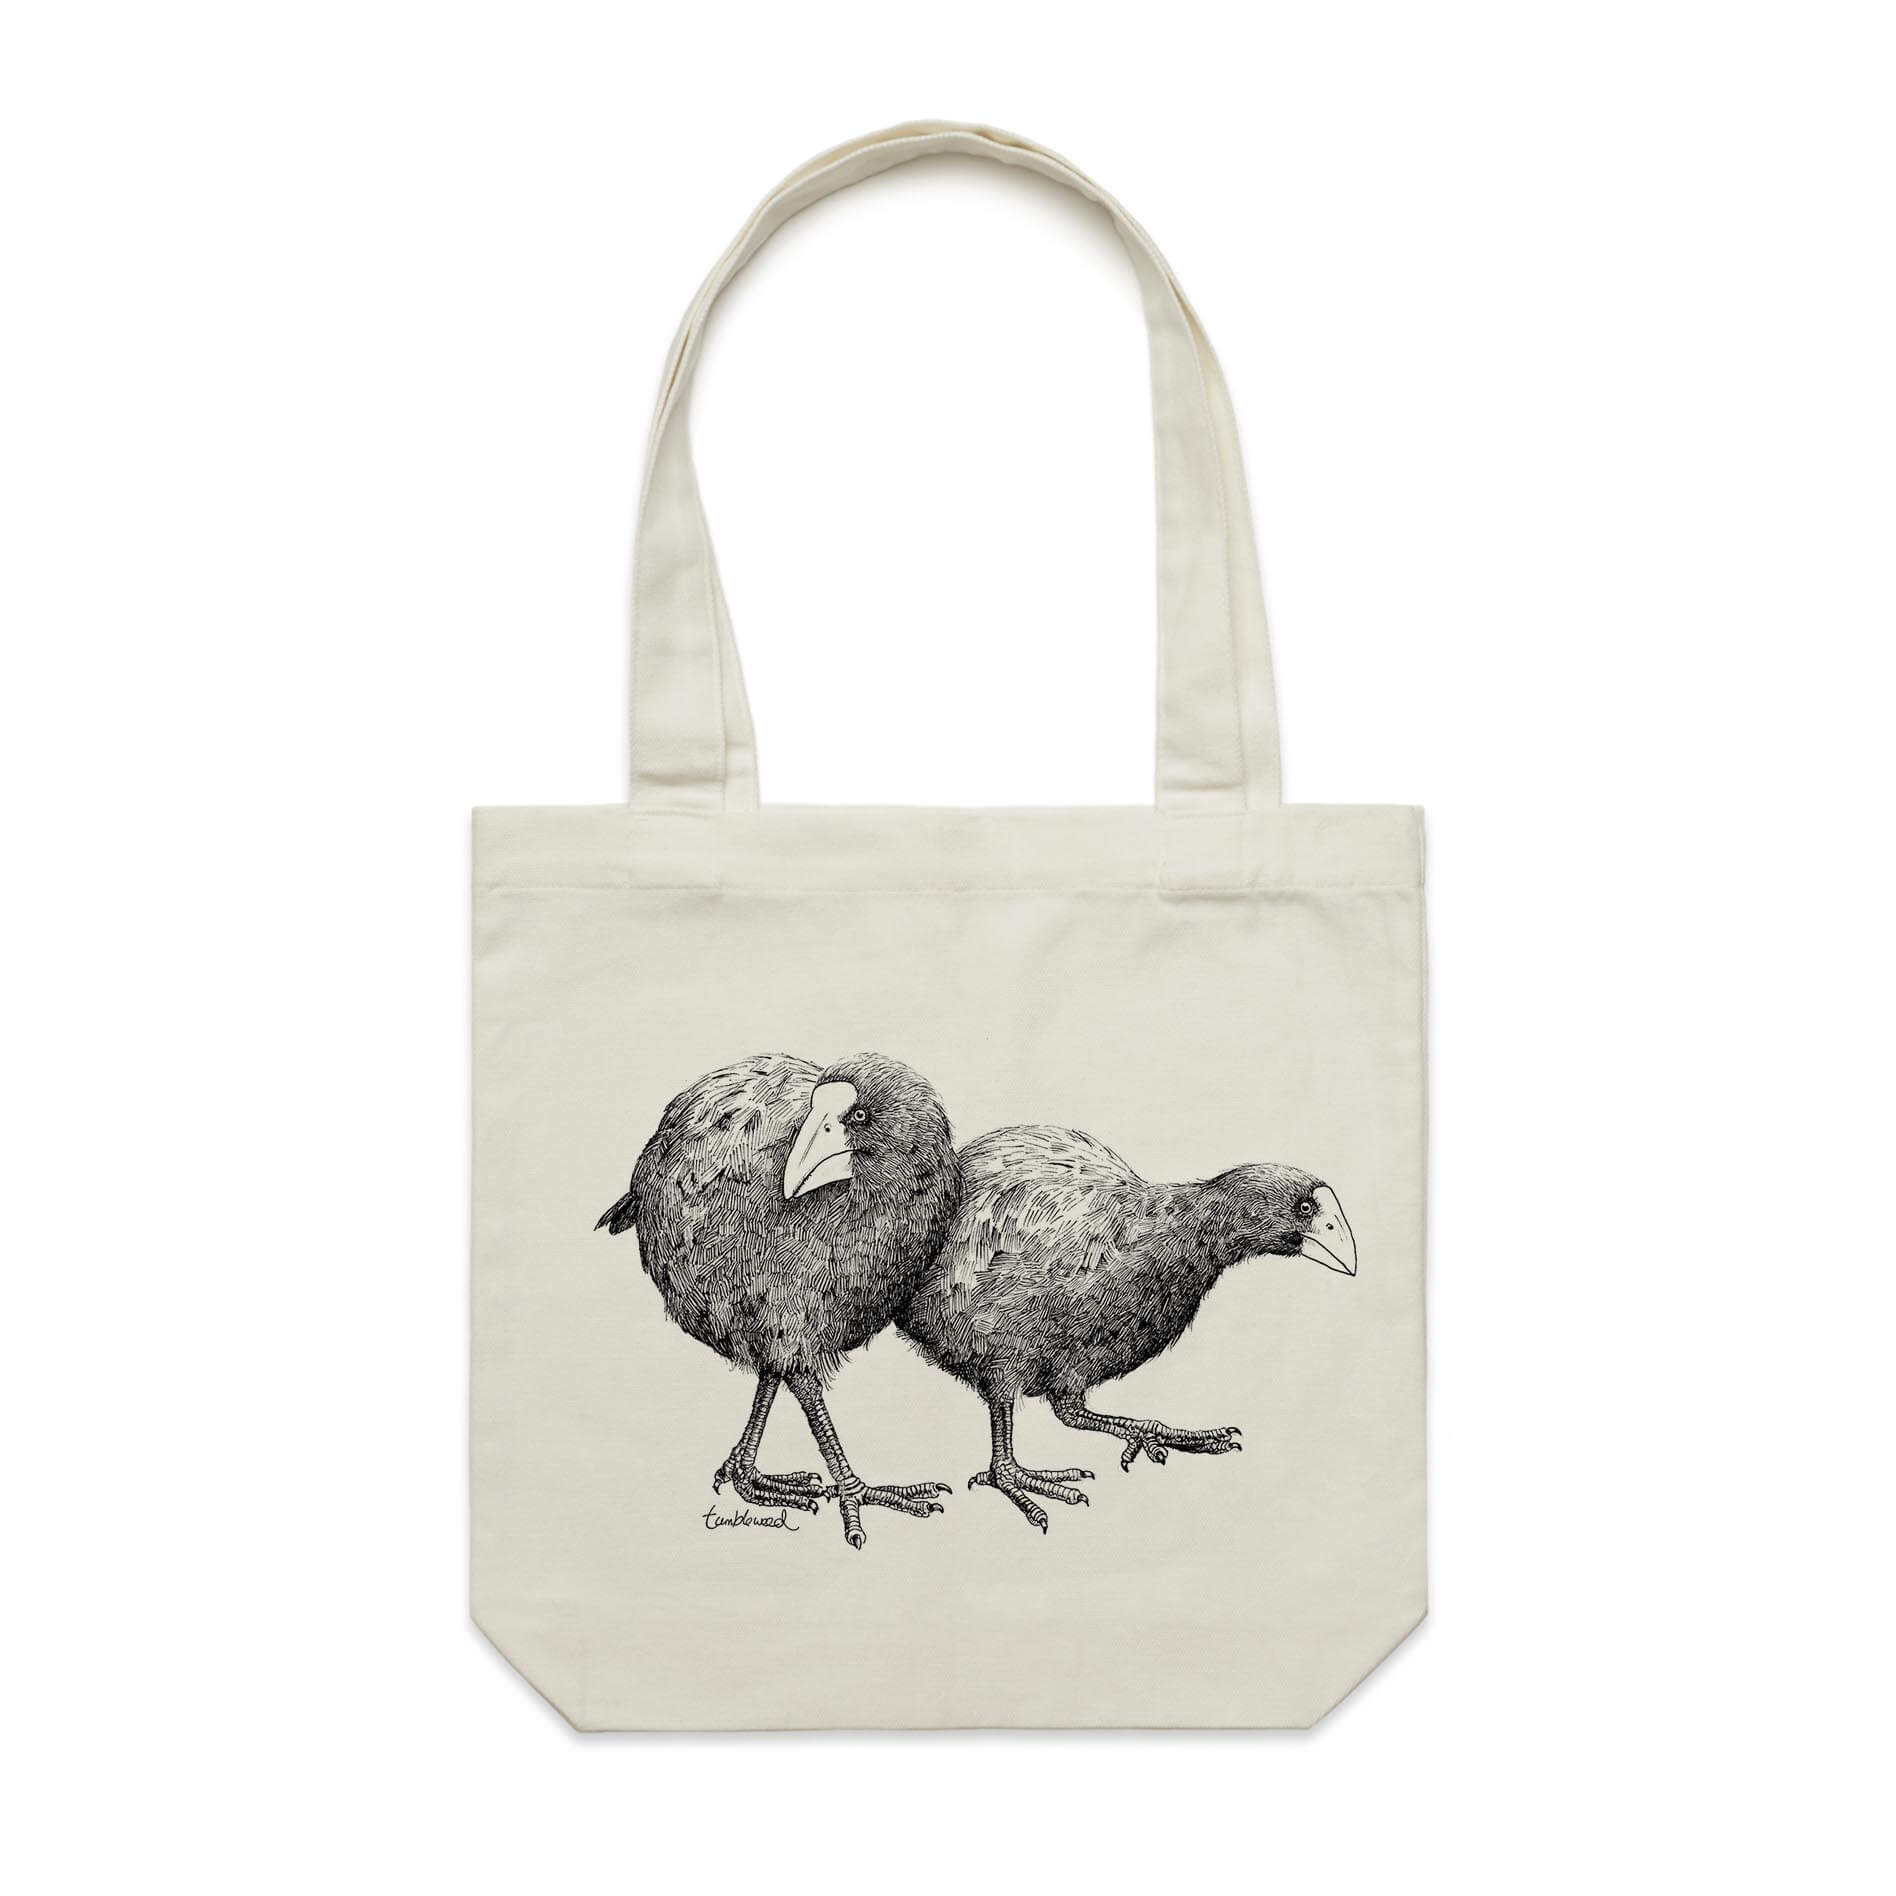 Cotton canvas tote bag with a screen printed Takahē design.